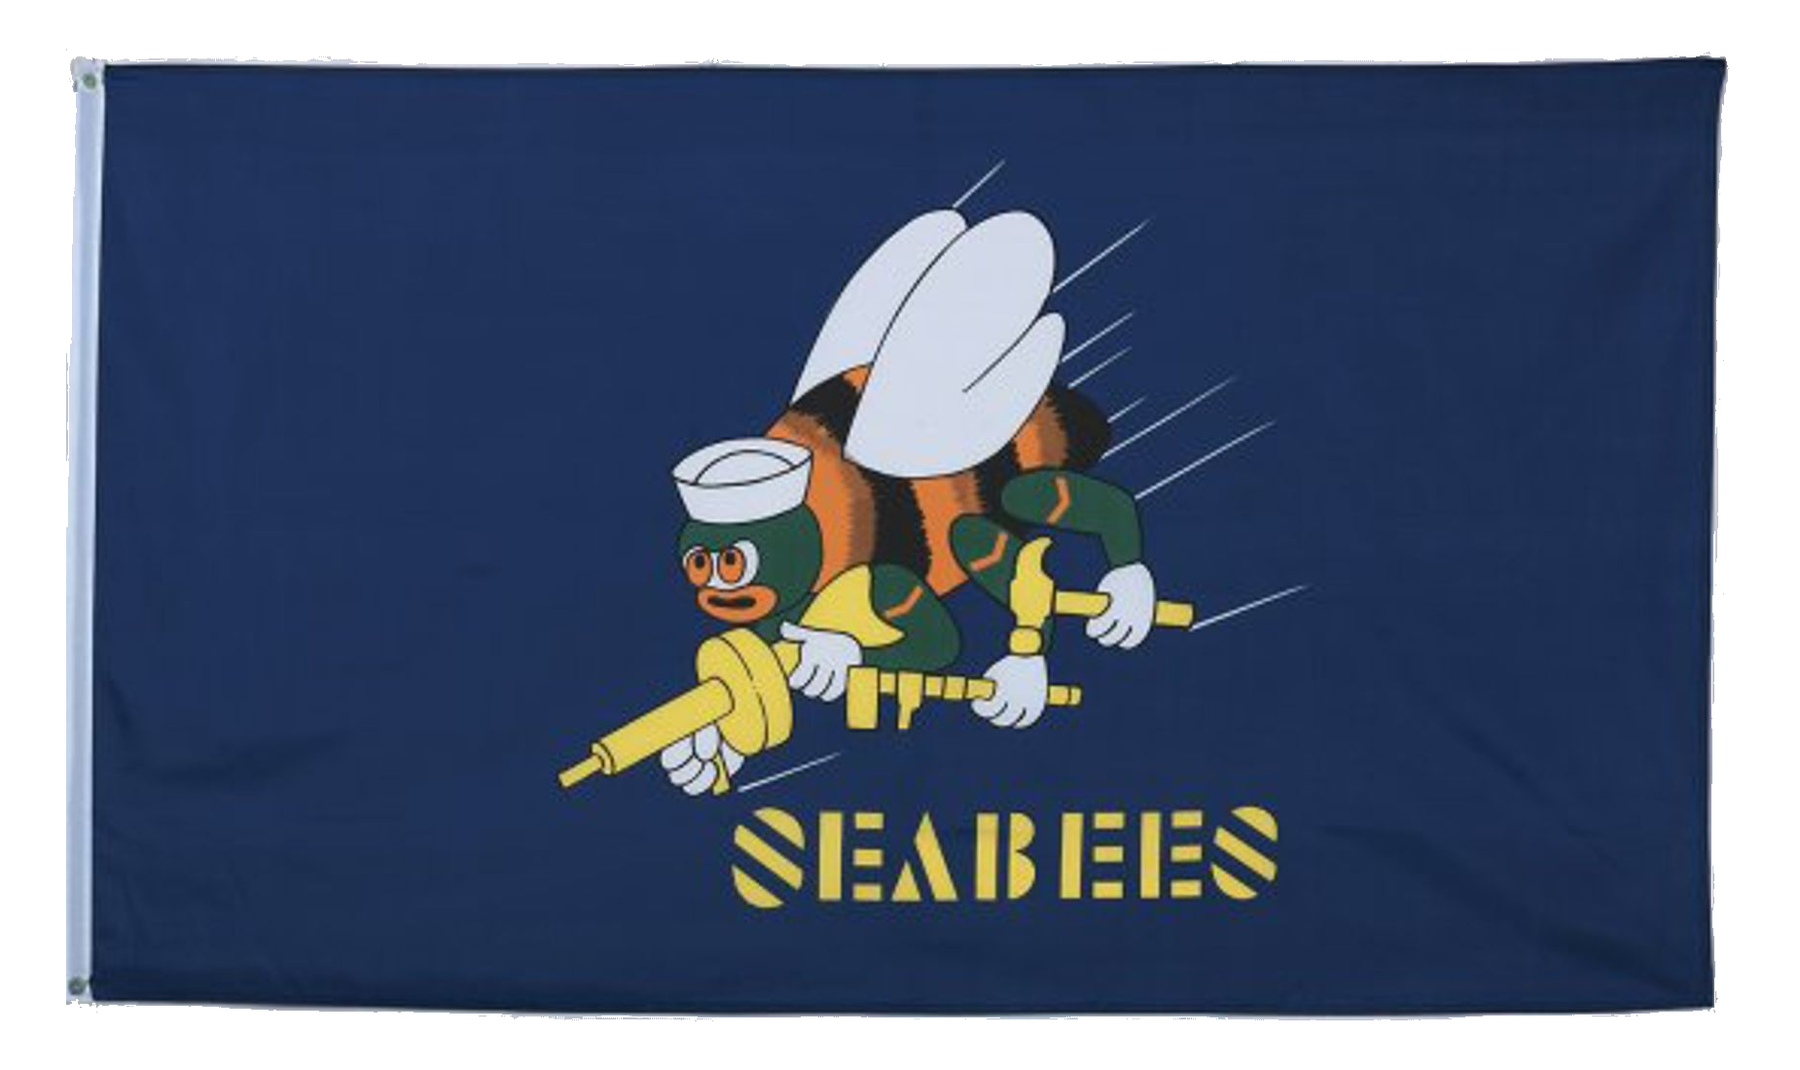 CLEARANCE - U.S. Navy SEABEES Flag - 3x5 Polyester